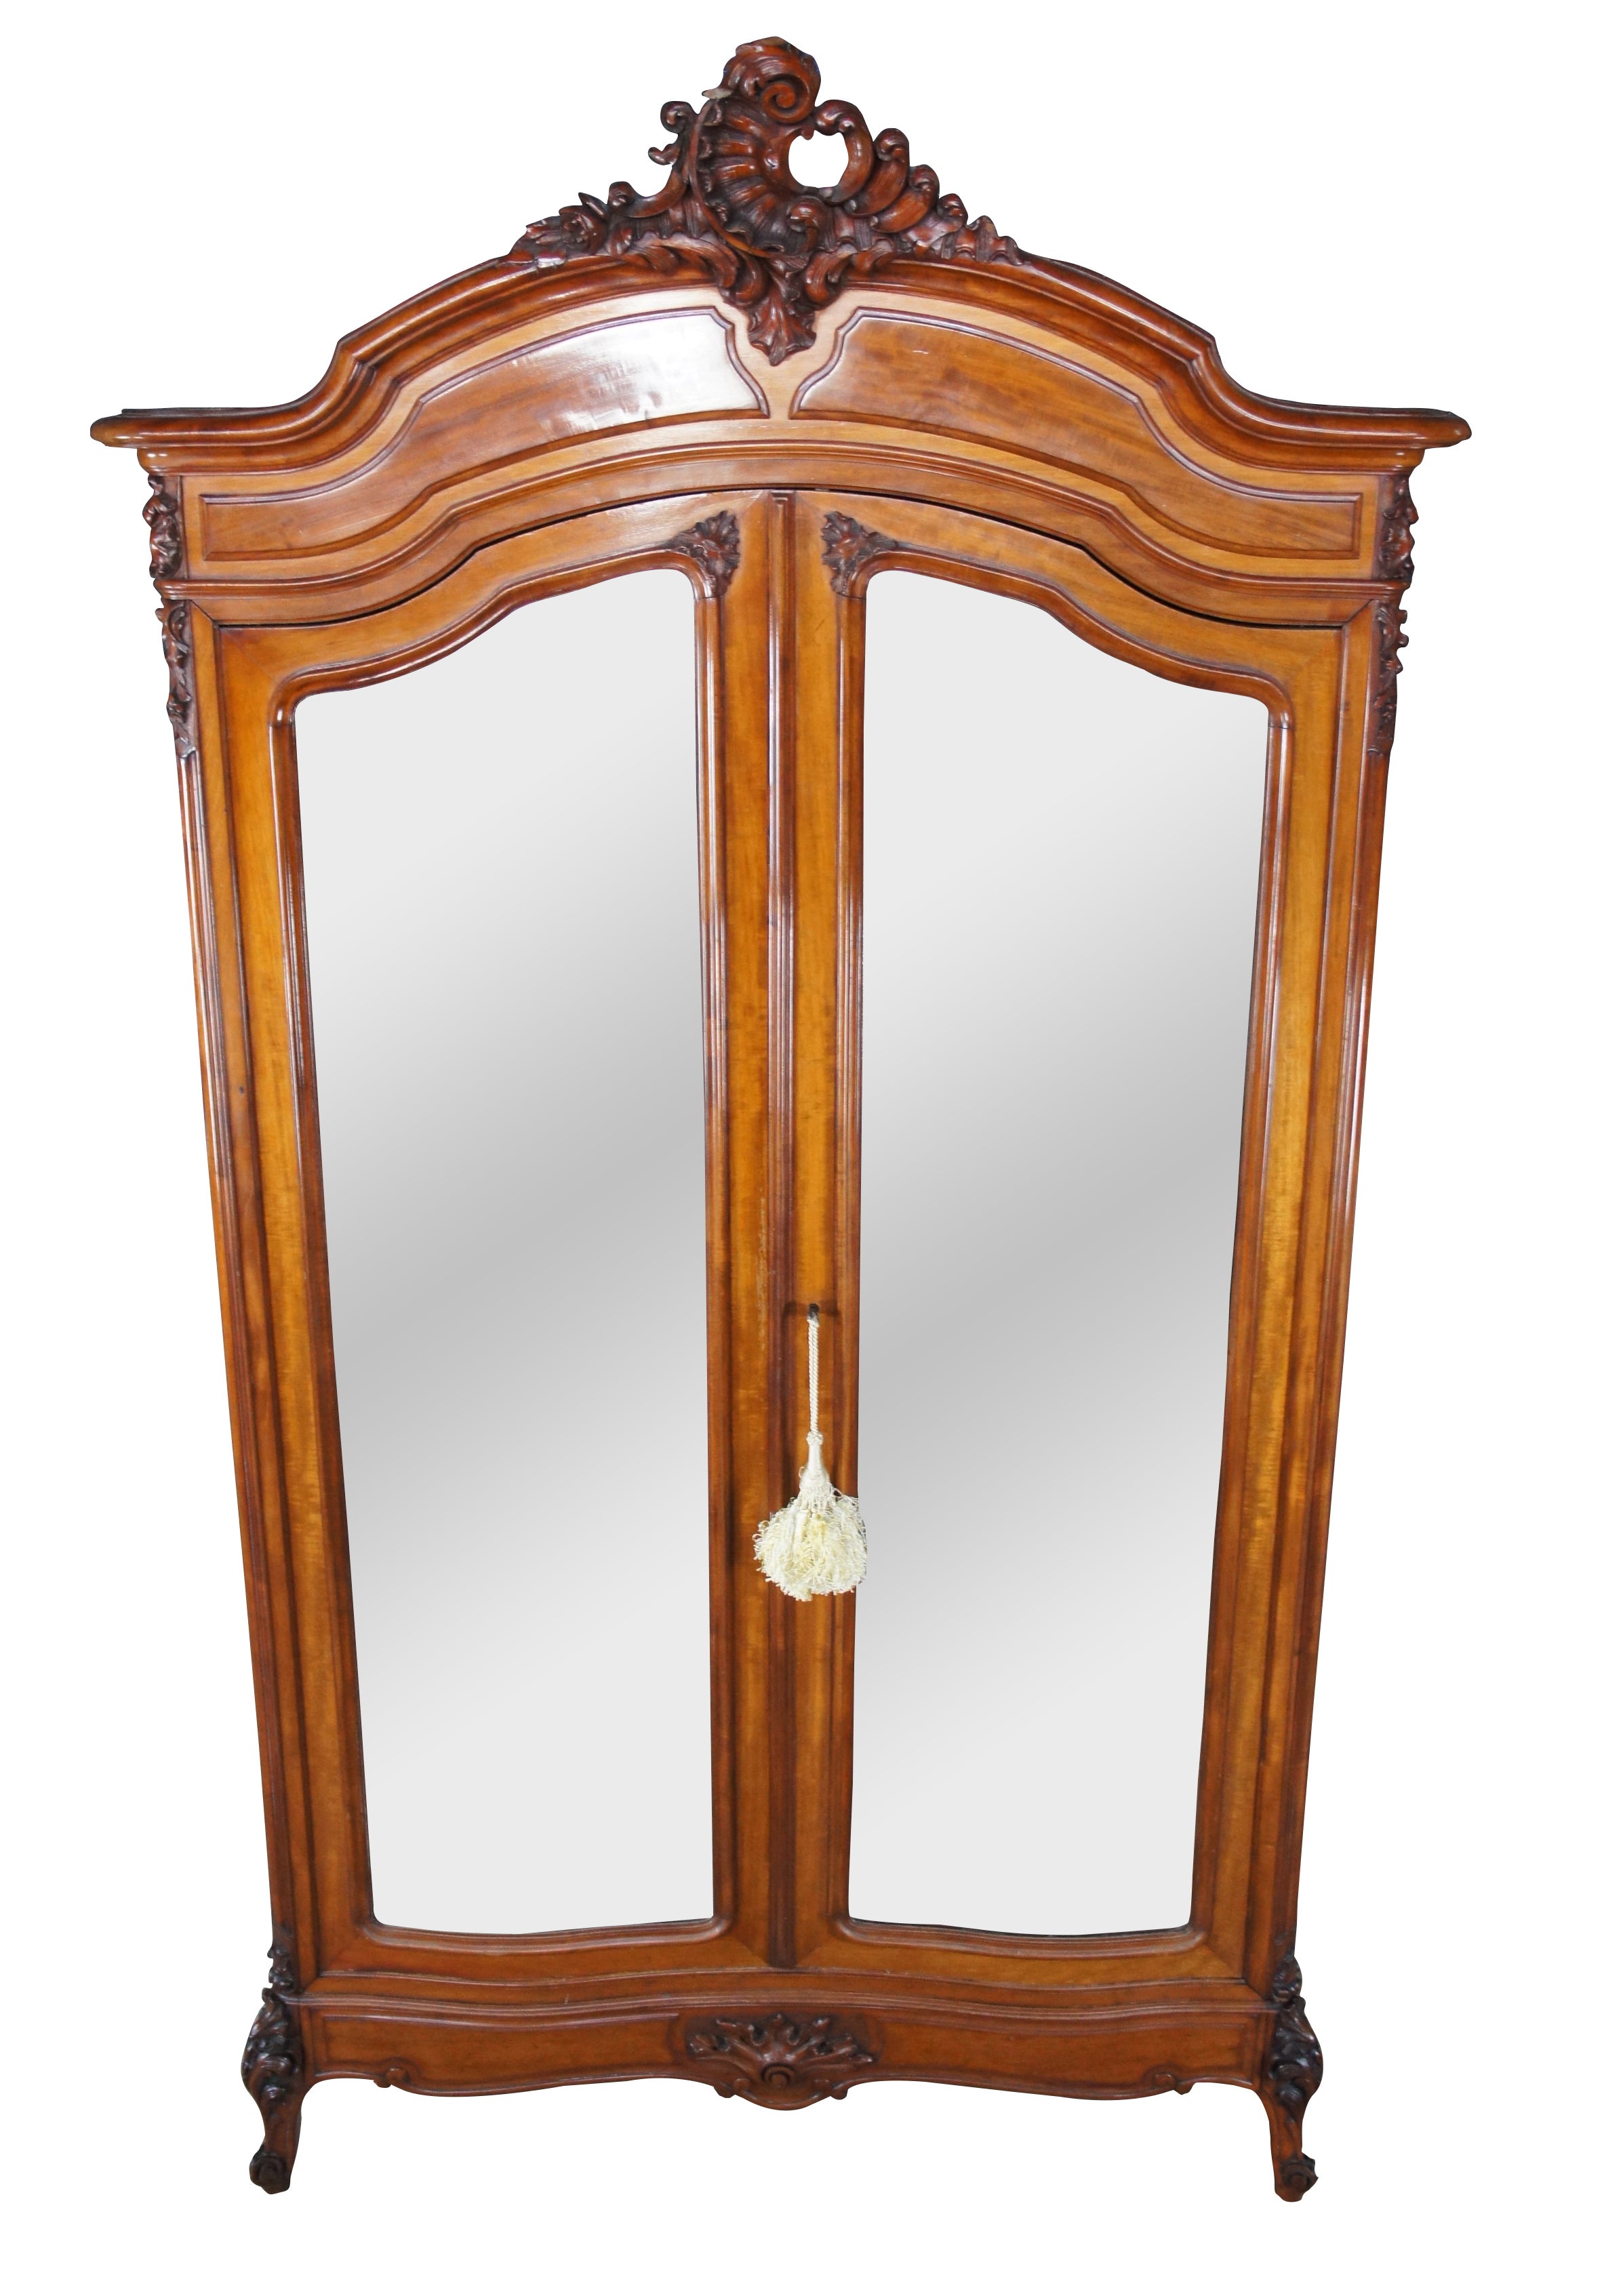 Monumental 19th century Louis XV / Rococo wardrobe or linen Press. Made of mahogany with a beautiful wood grain. Features serpentine aprons with magnificent foliate, acanthus and baroque inspired carvings. Includes large beveled mirrored doors and